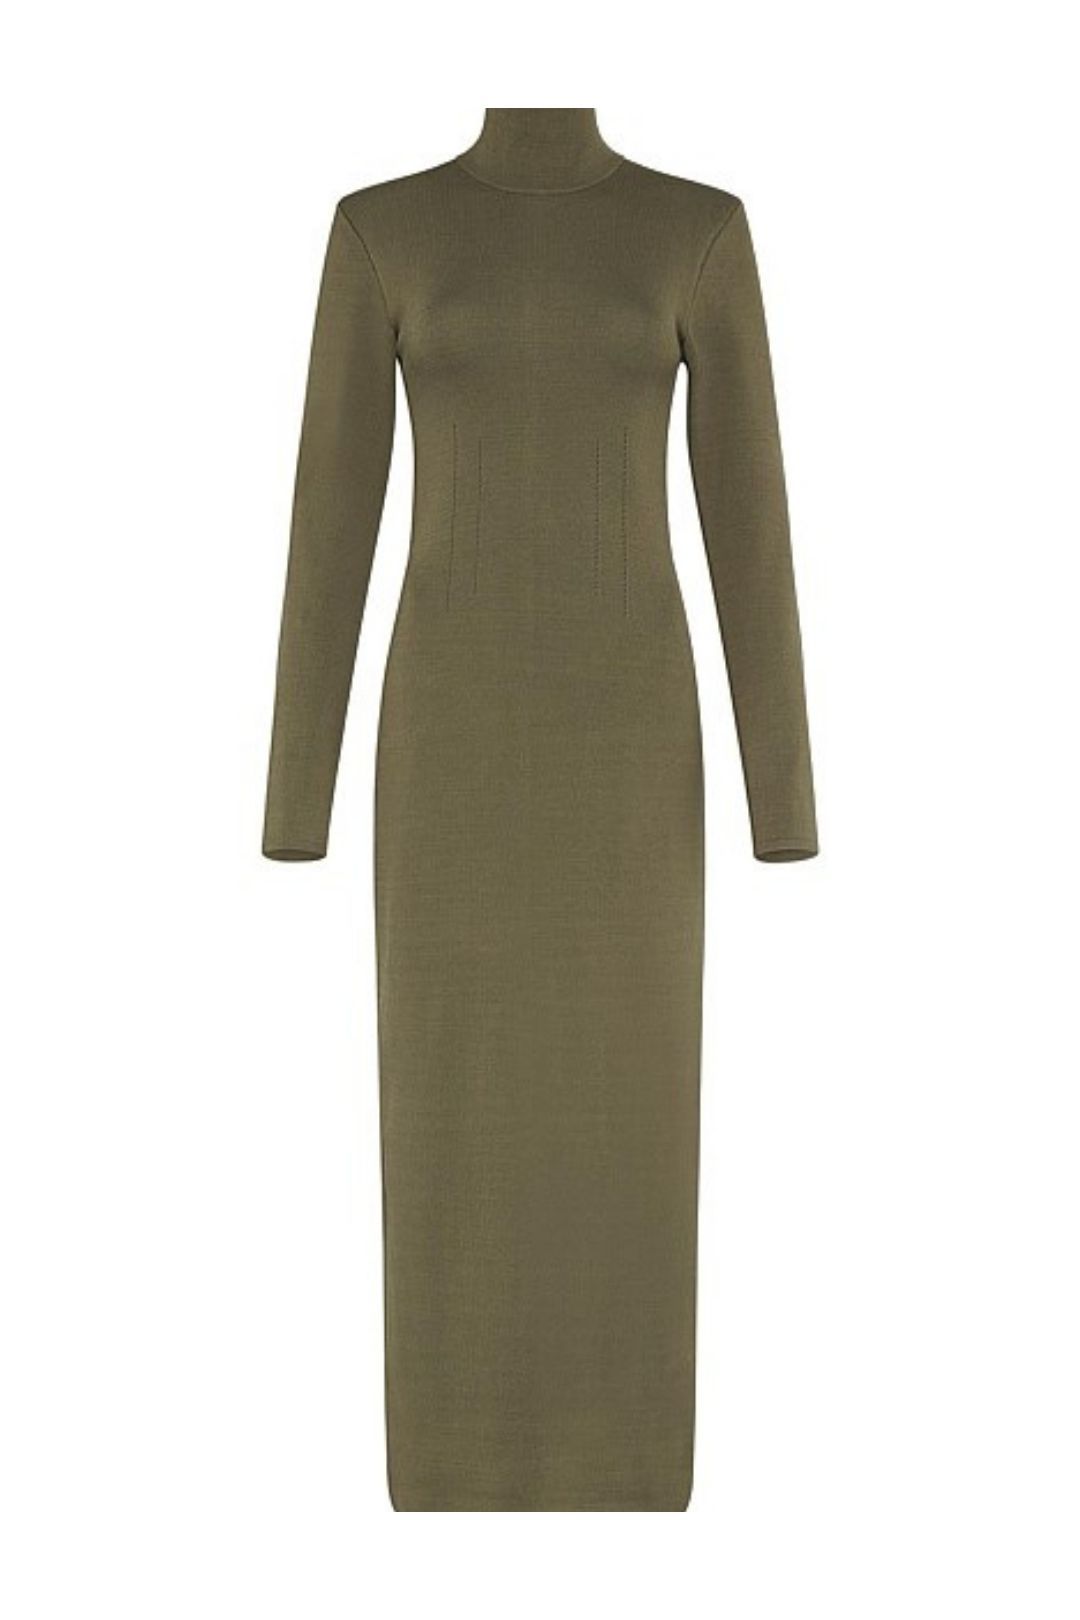 AJE Anika Fitted Dress in Khaki